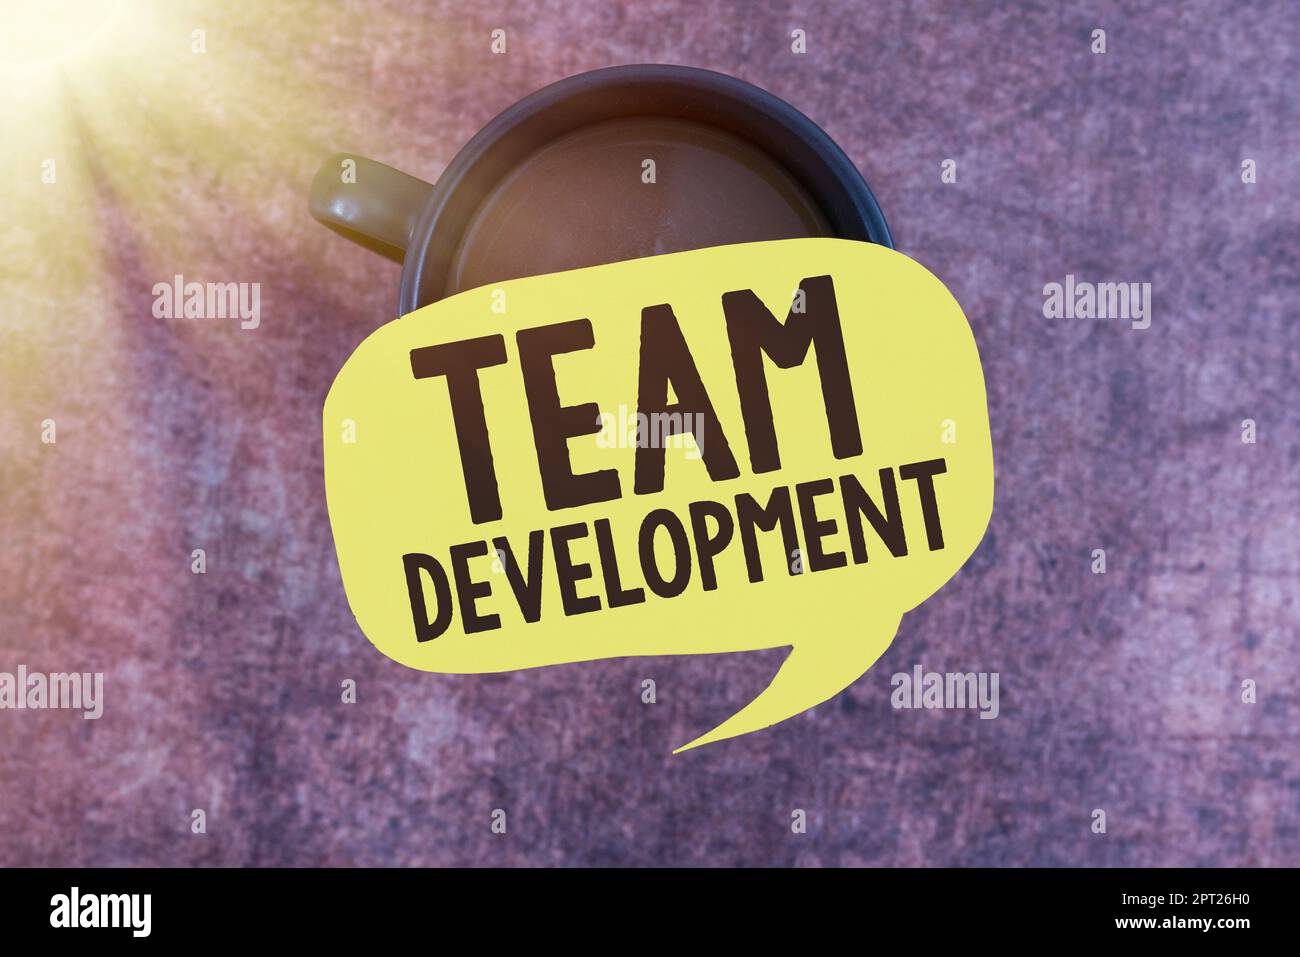 Hand writing sign Team Developmentlearn why and how small groups change over time with graphs, Business idea learn why and how small groups change ove Stock Photo